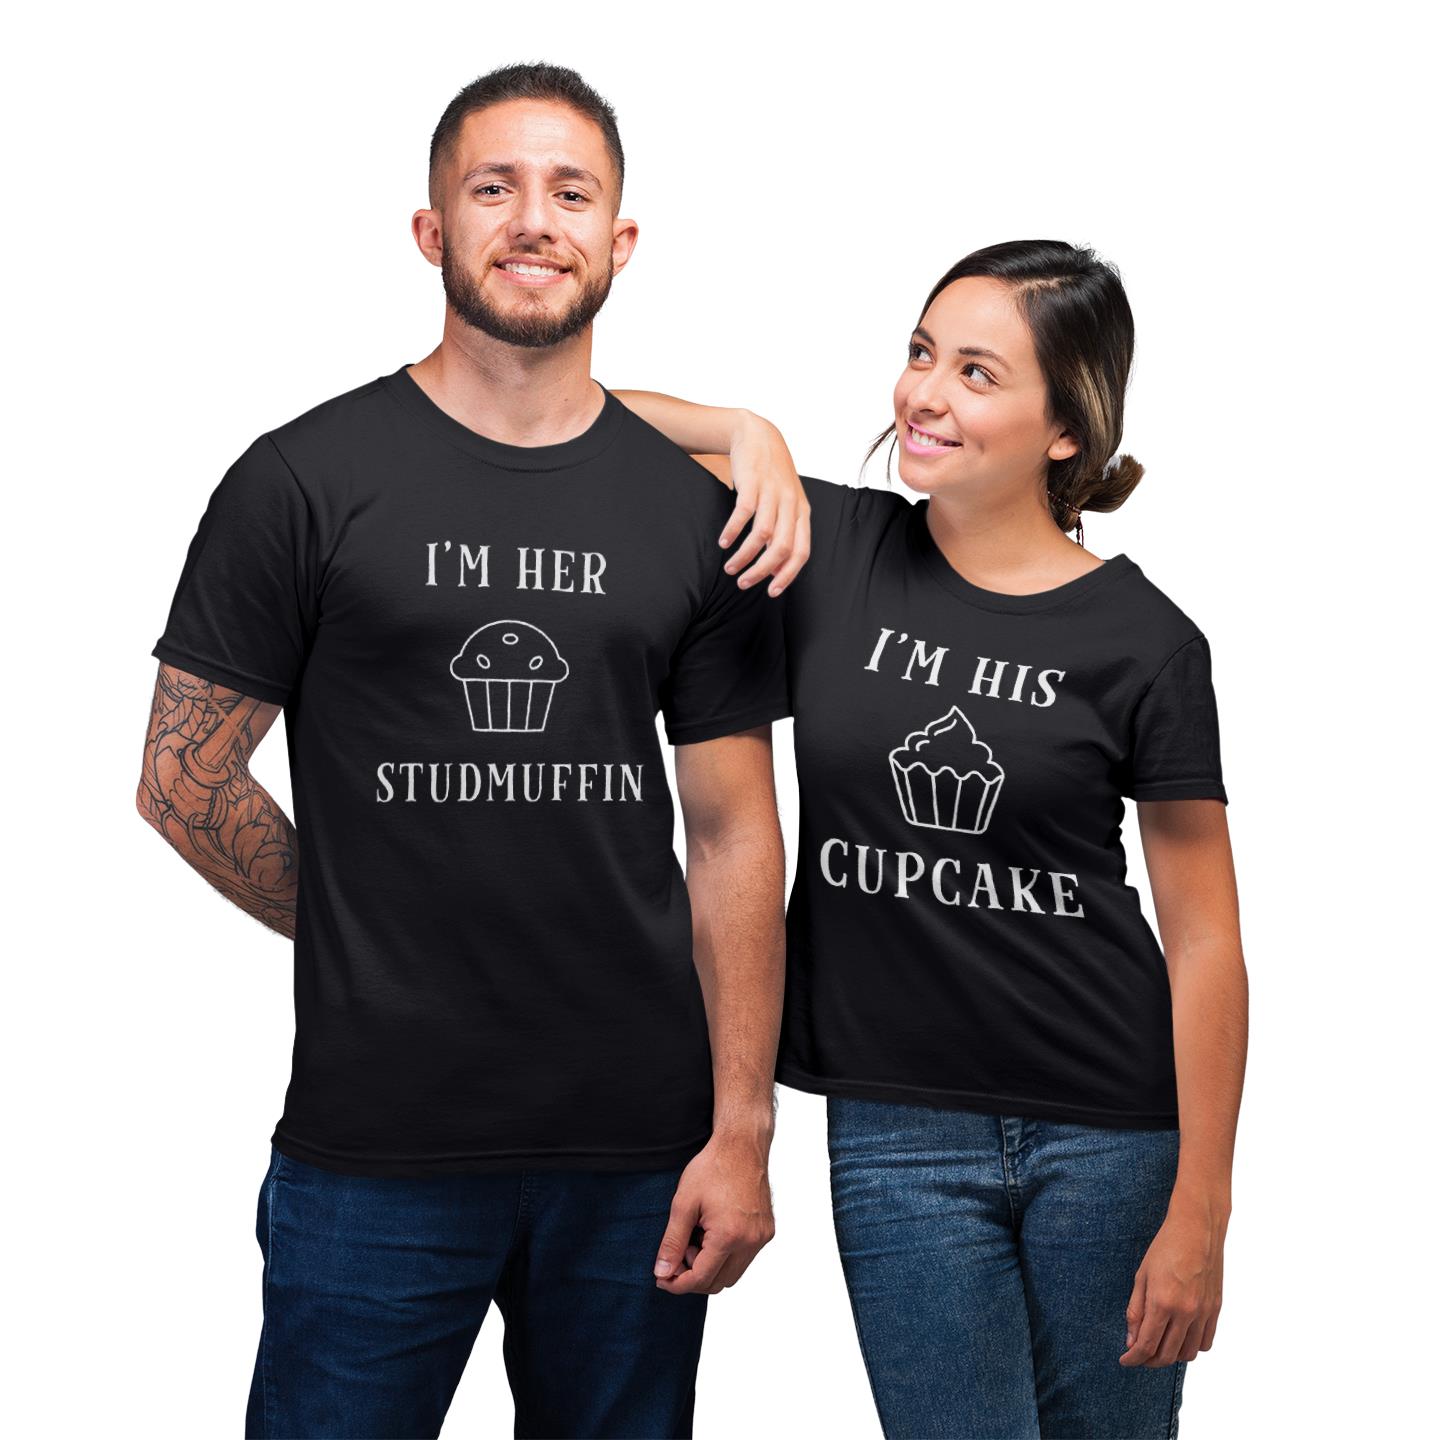 Studmuffin And Cupcake Him And Her Shirt For Couple Lover Matchig T-shirt